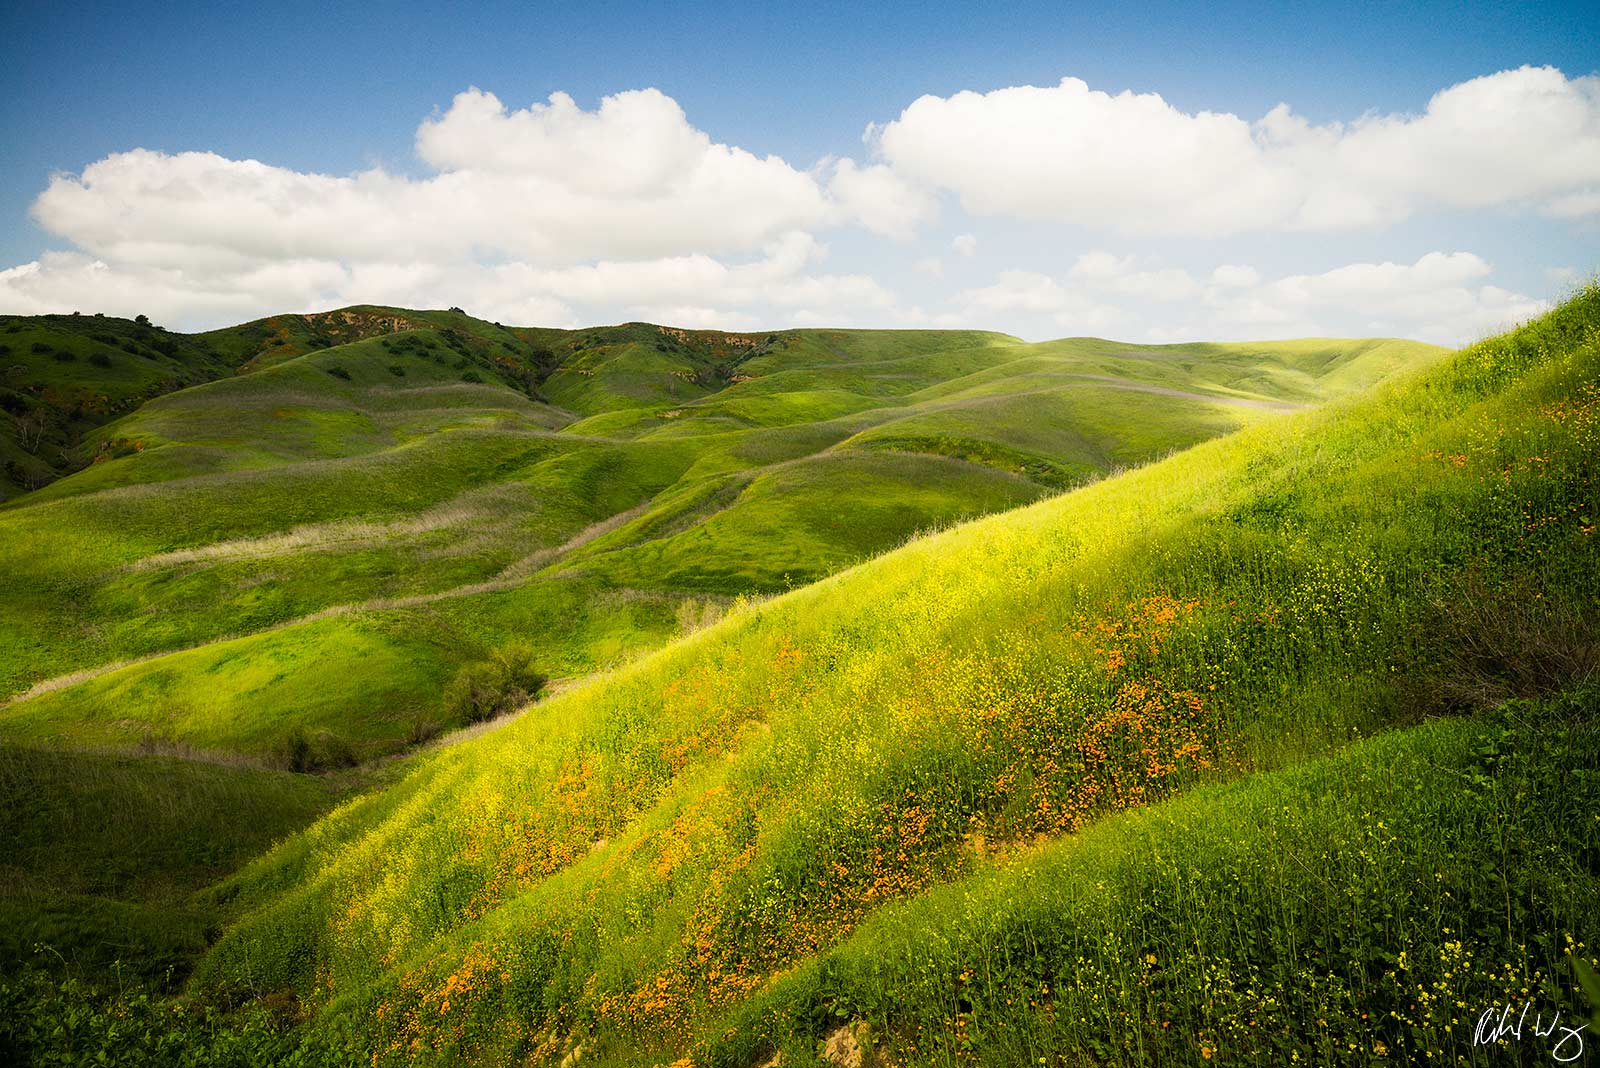 Protecting a Legacy|Conservation Efforts at Chino Hills State Park